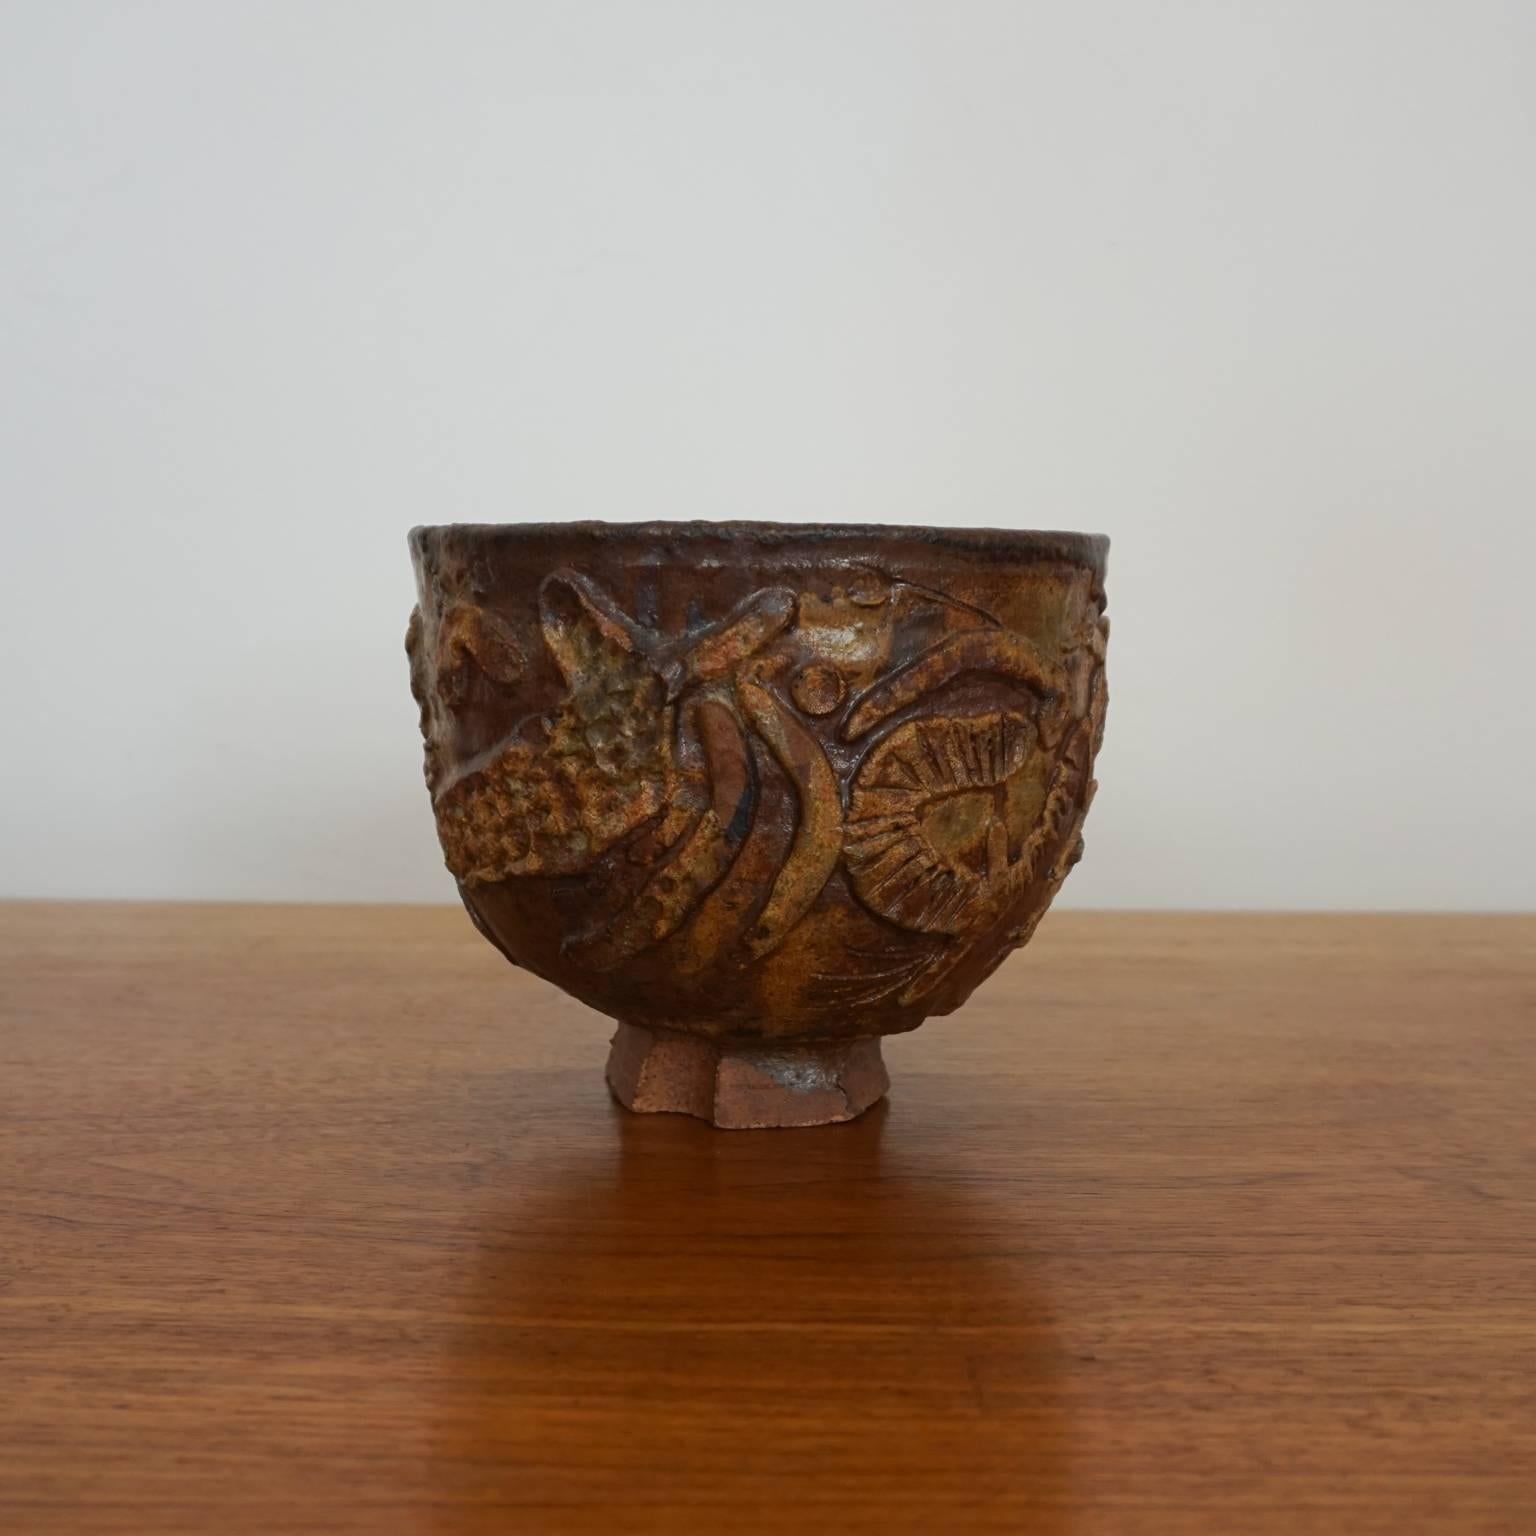 Ceramic bowl by Robert Arneson. The applied design is a great example of the artist's transition into Funk. Signed. 

Robert Arneson was a California artist and professor of ceramics at UC Davis for nearly three decades. He is considered the